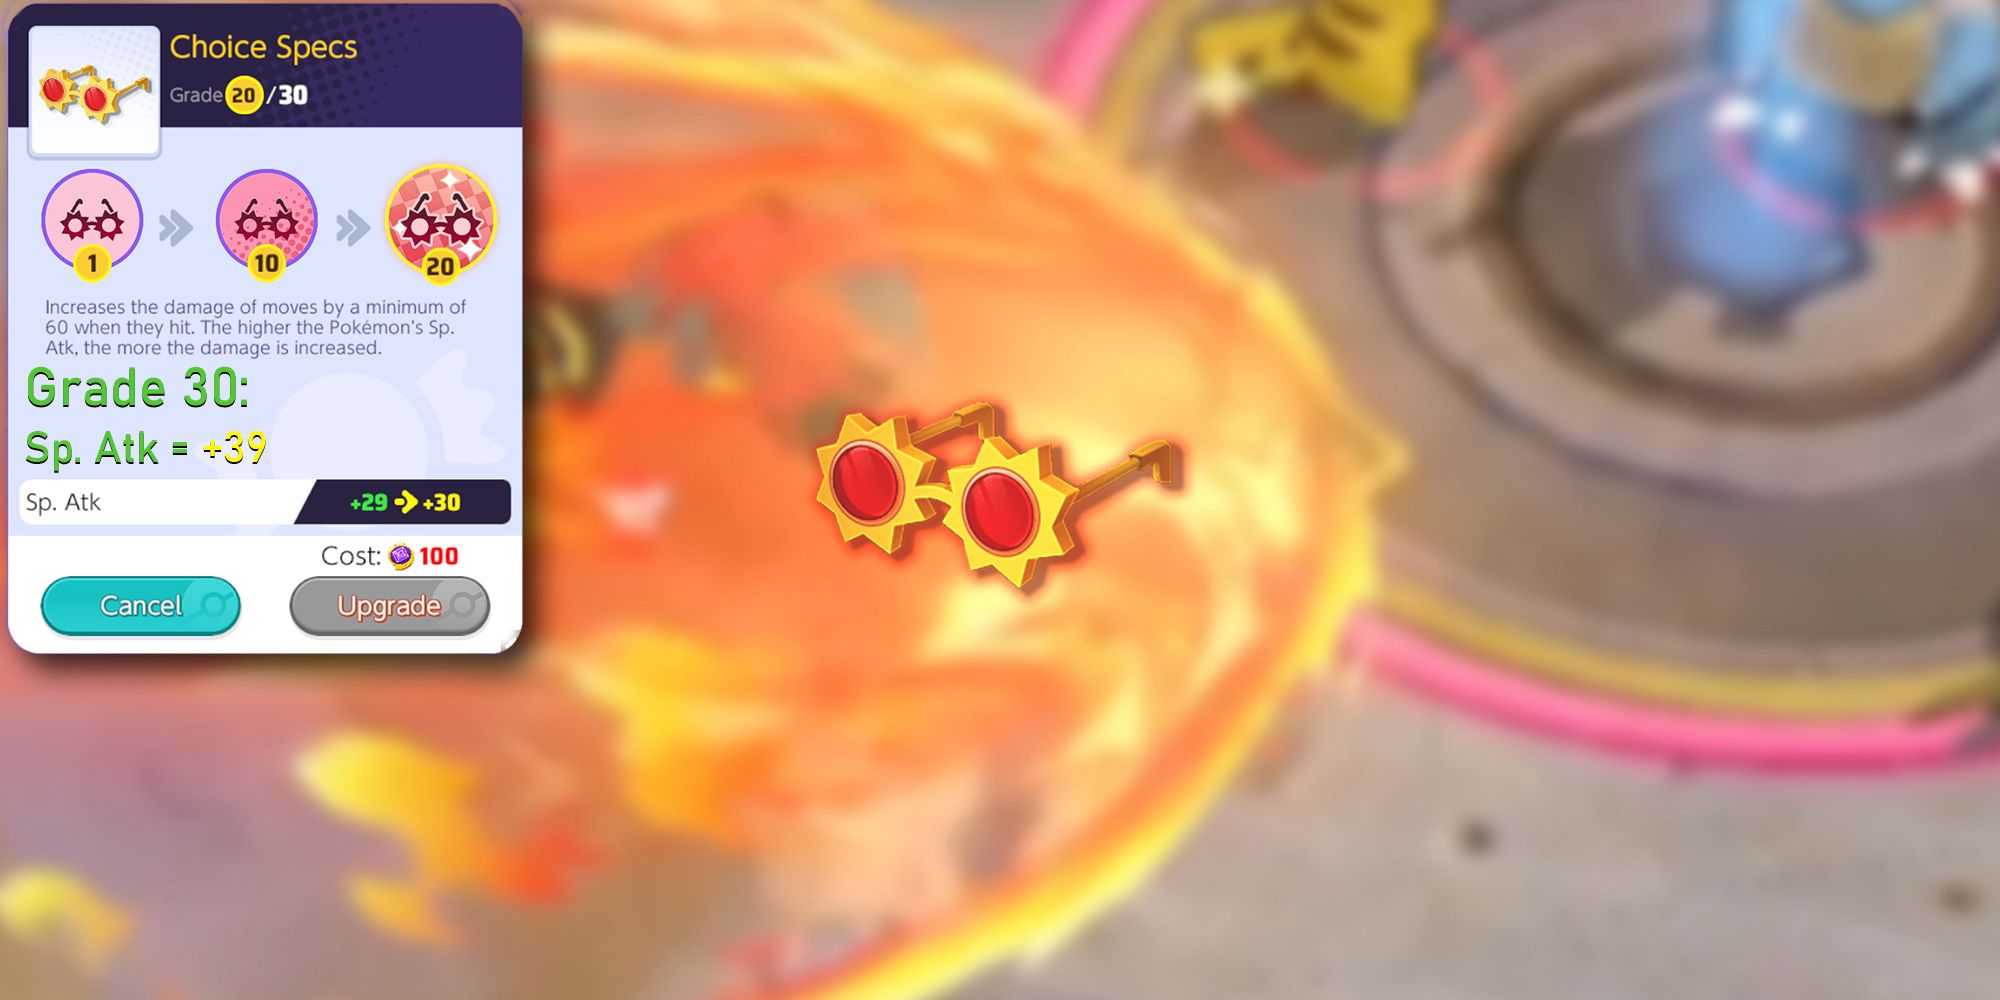 Pokemon Unite - PNG and Cutout of Choice Specs Overlaid On Blurred Image Of Talonflame Using Unite Move